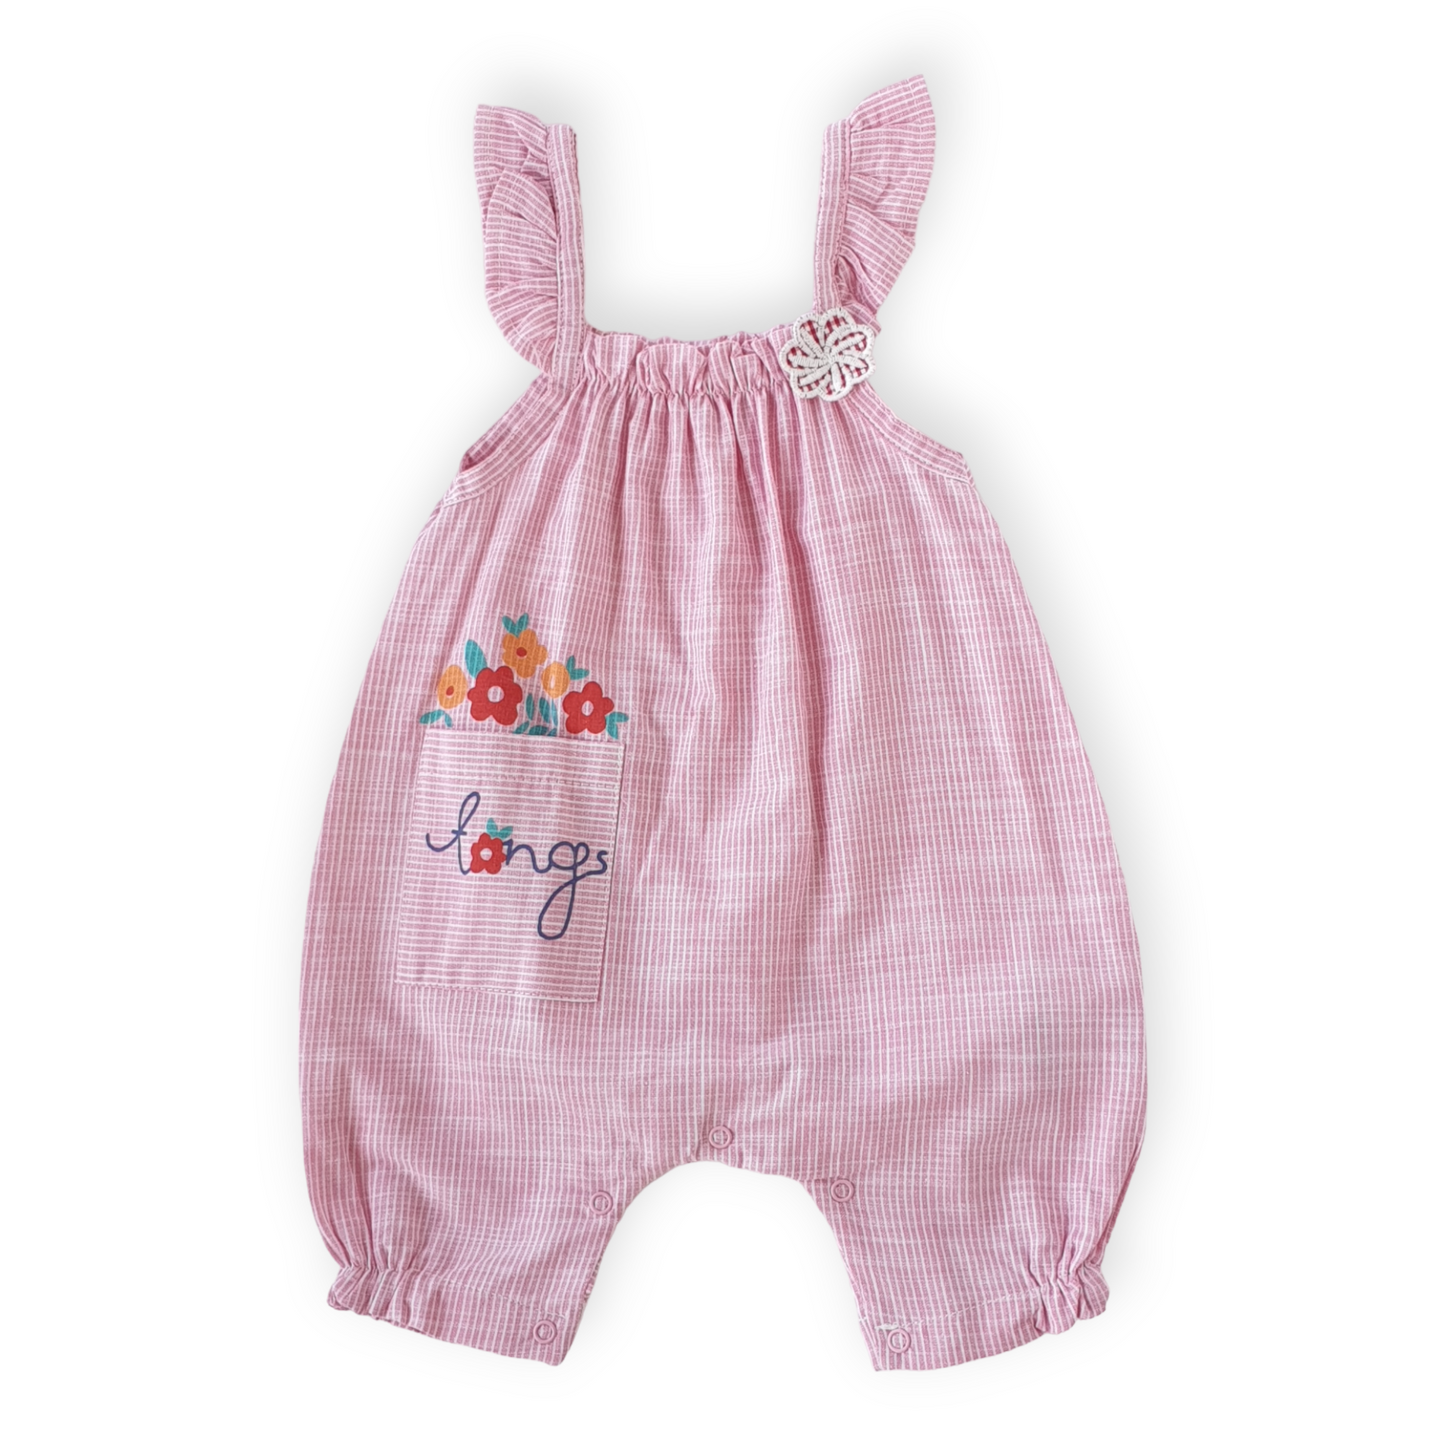 Striped Pink Summer Romper with Flowers-Catgirl, Catromper, Girl, Pink, Romper, Sleeveless, SS23, Striped, White-Tongs-[Too Twee]-[Tootwee]-[baby]-[newborn]-[clothes]-[essentials]-[toys]-[Lebanon]